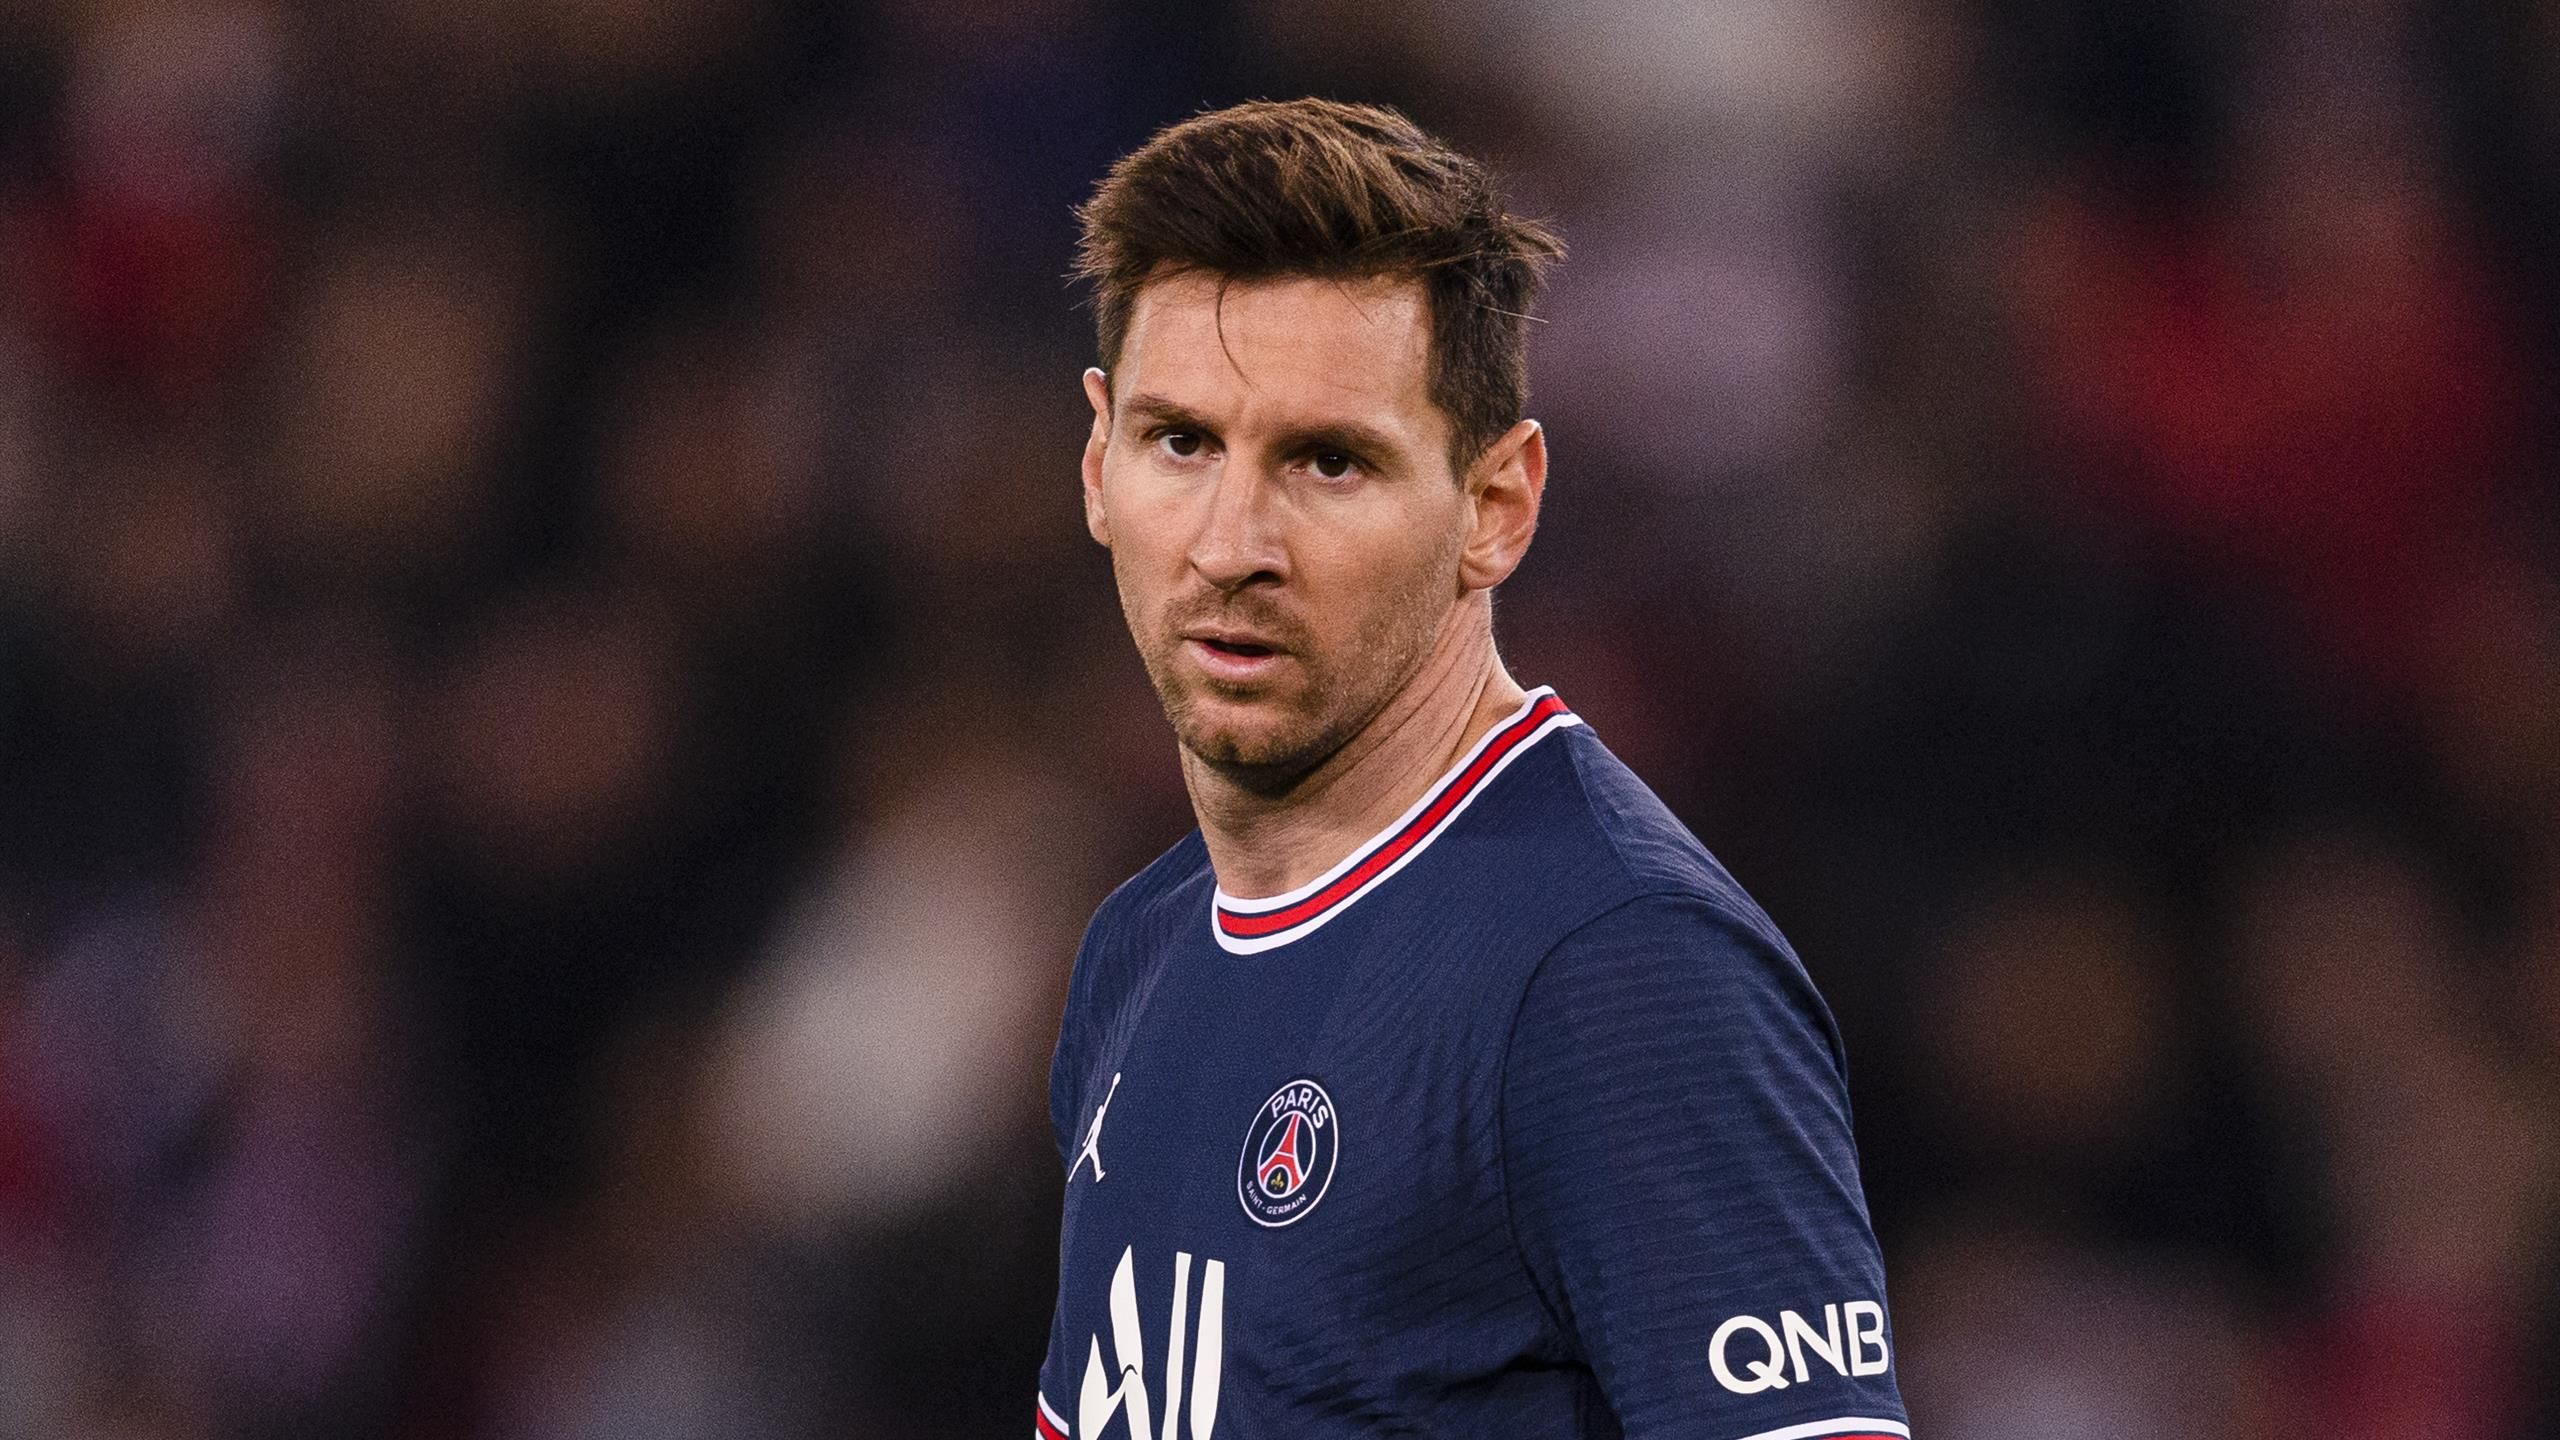 Barcelona Eye Ambitious Lionel Messi Reunion From Paris Saint Germain In 2023 Thanks To Xavi Appointment